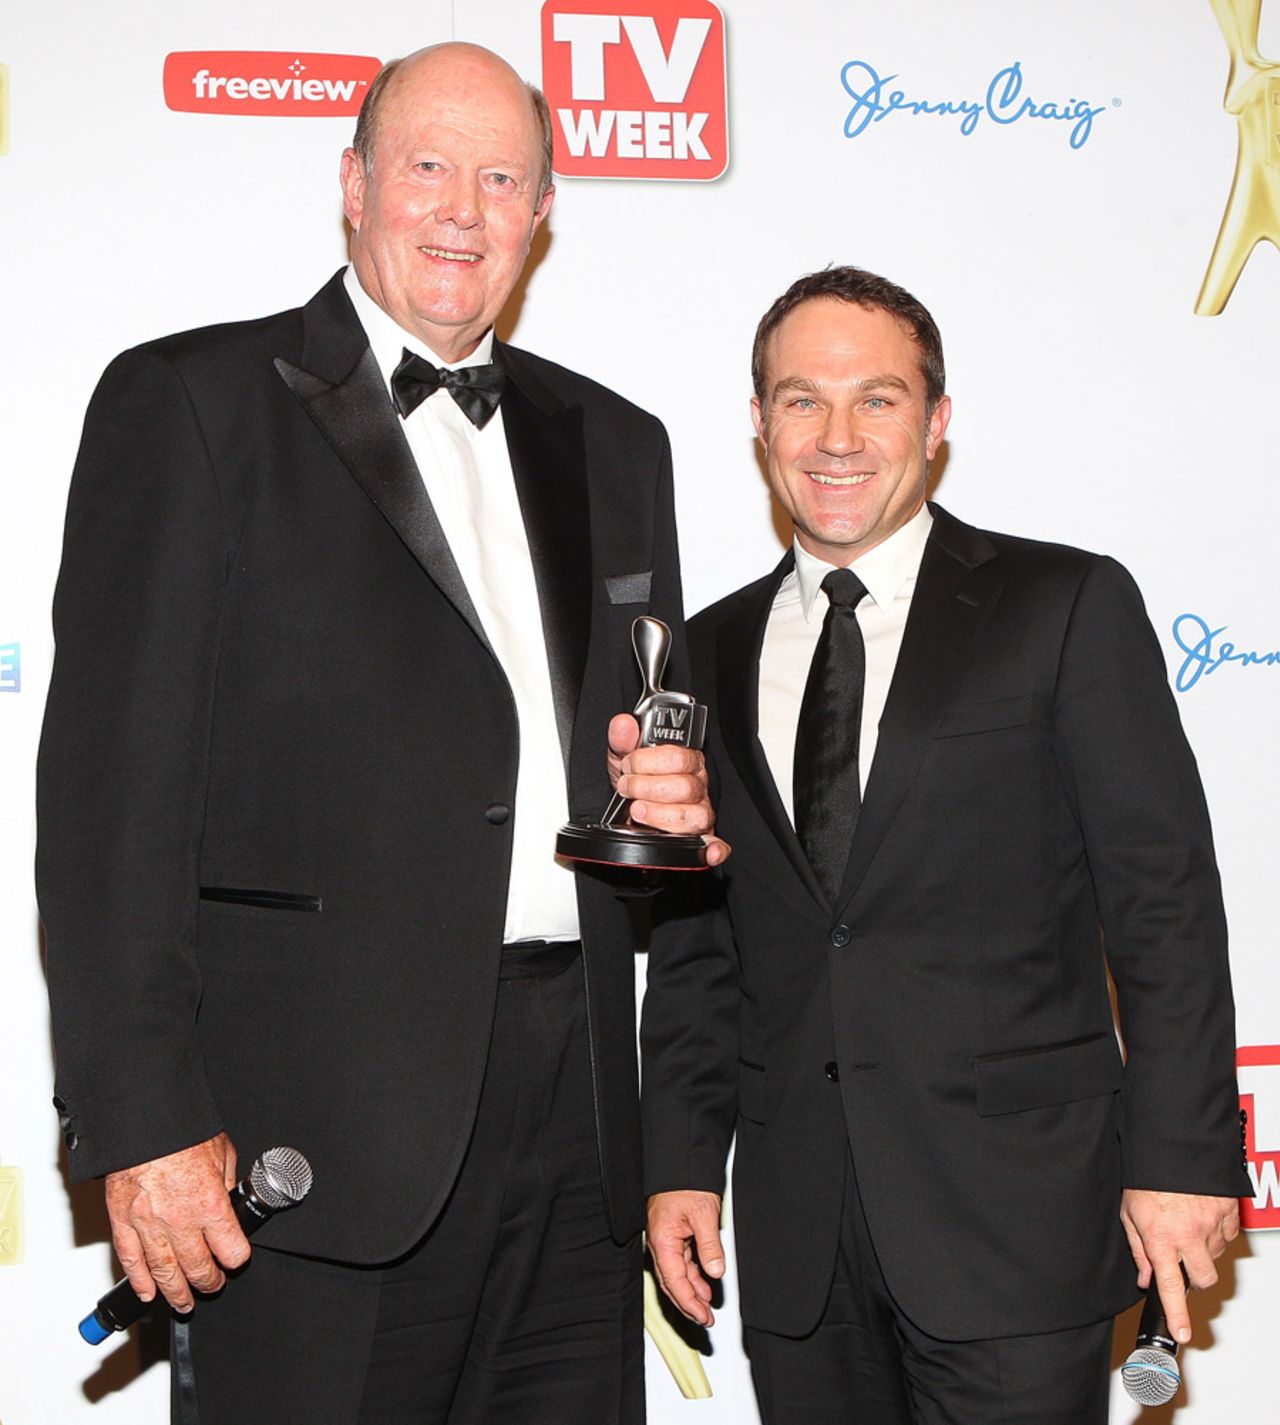 Tony Greig and Michael Slater with their Logie awards at Crown Palladium, Melbourne, May 1, 2011